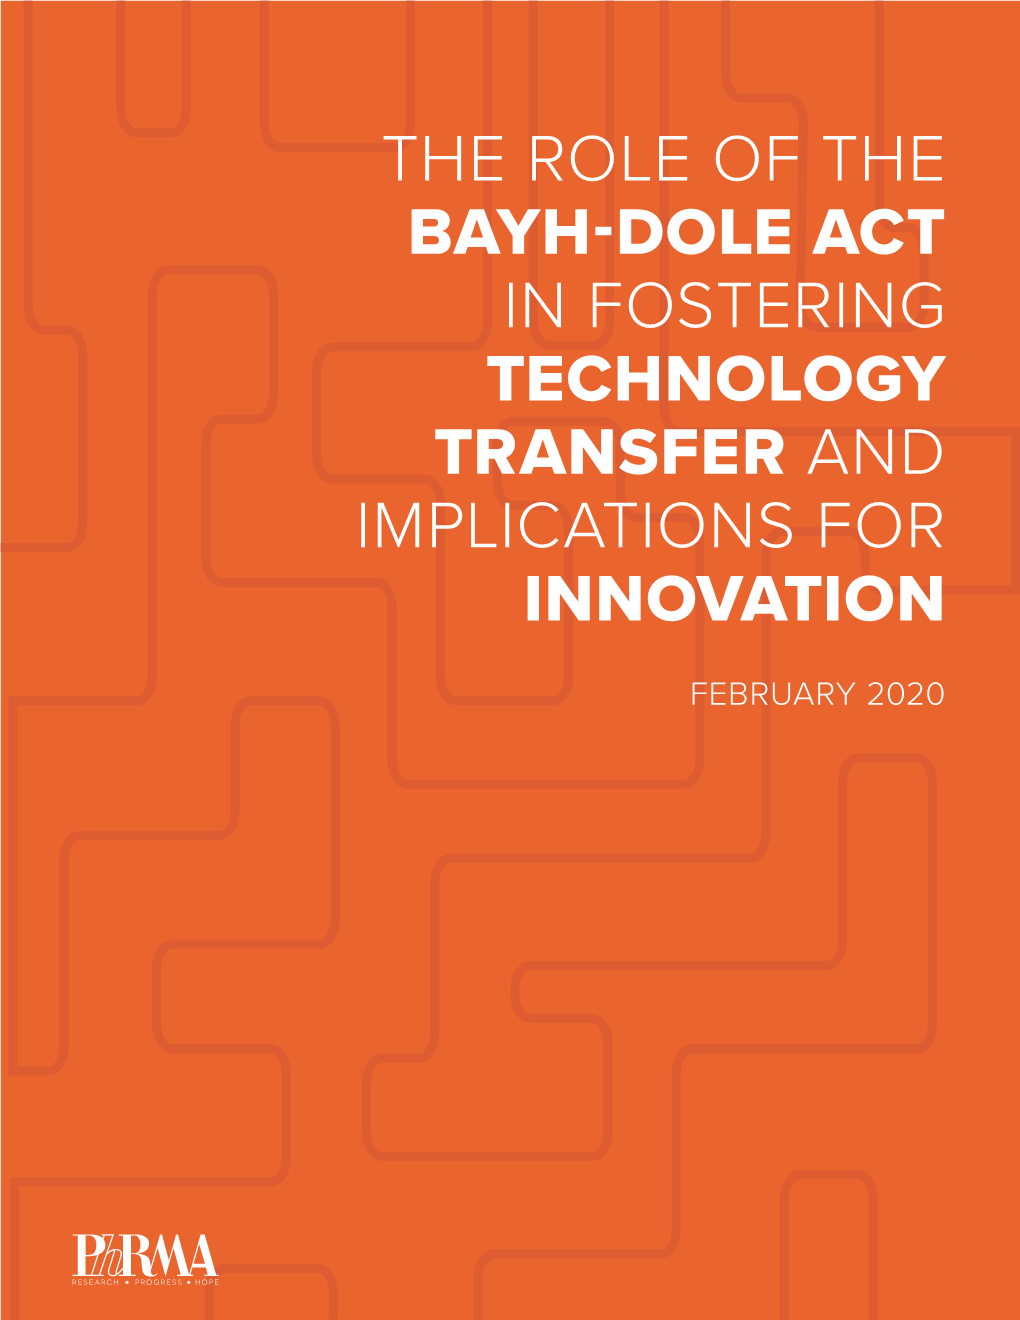 The Role of the Bayh-Dole Act in Fostering Technology Transfer and Implications for Innovation